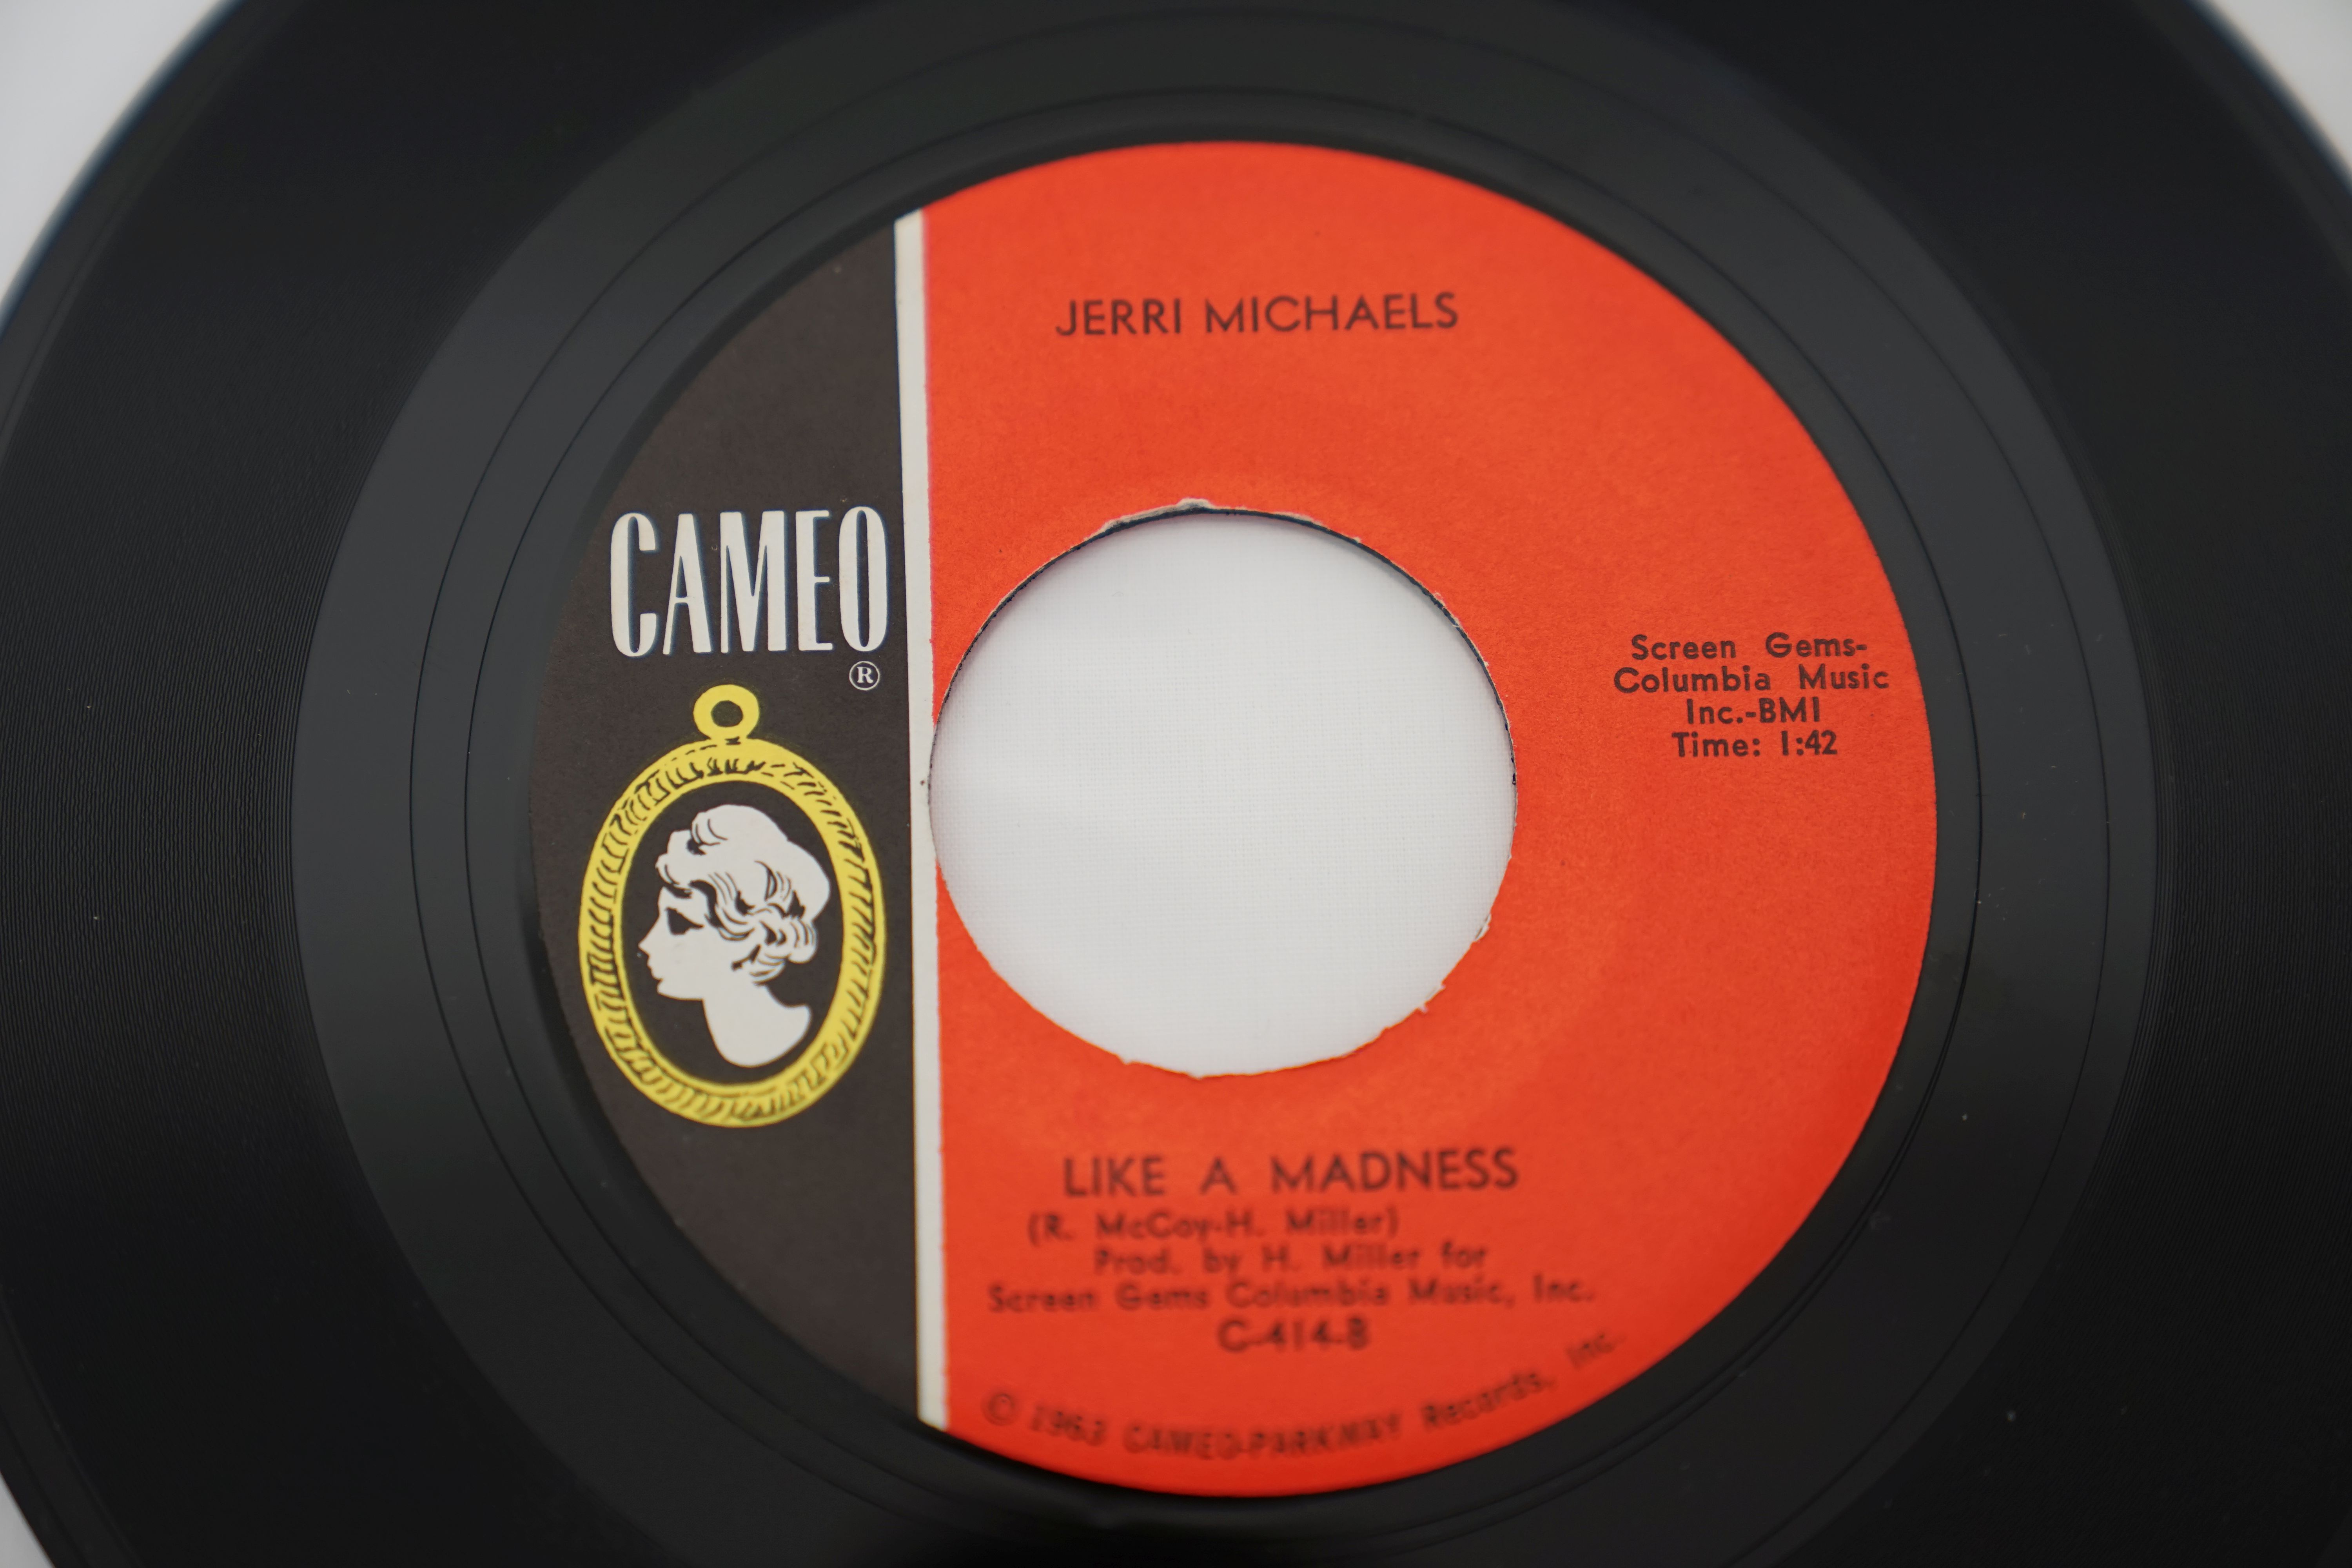 Vinyl - 3 rare Original US 1st pressing Northern Soul single on the Cameo Parkway label. The Sweet - Image 4 of 17